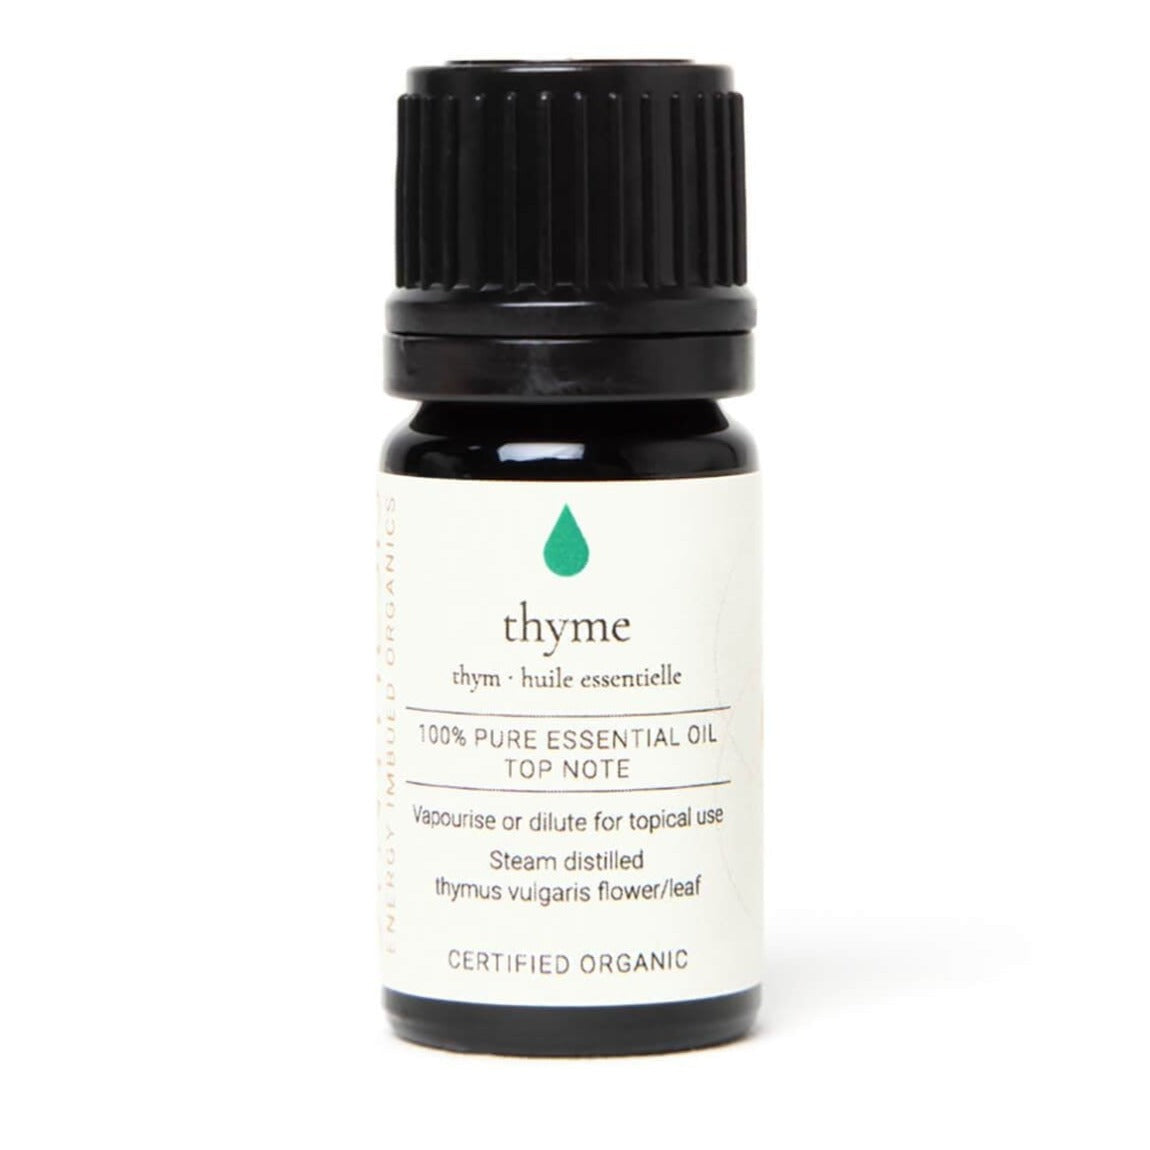 Thyme Certified Organic Essential Oil aroma Synthesis Organics